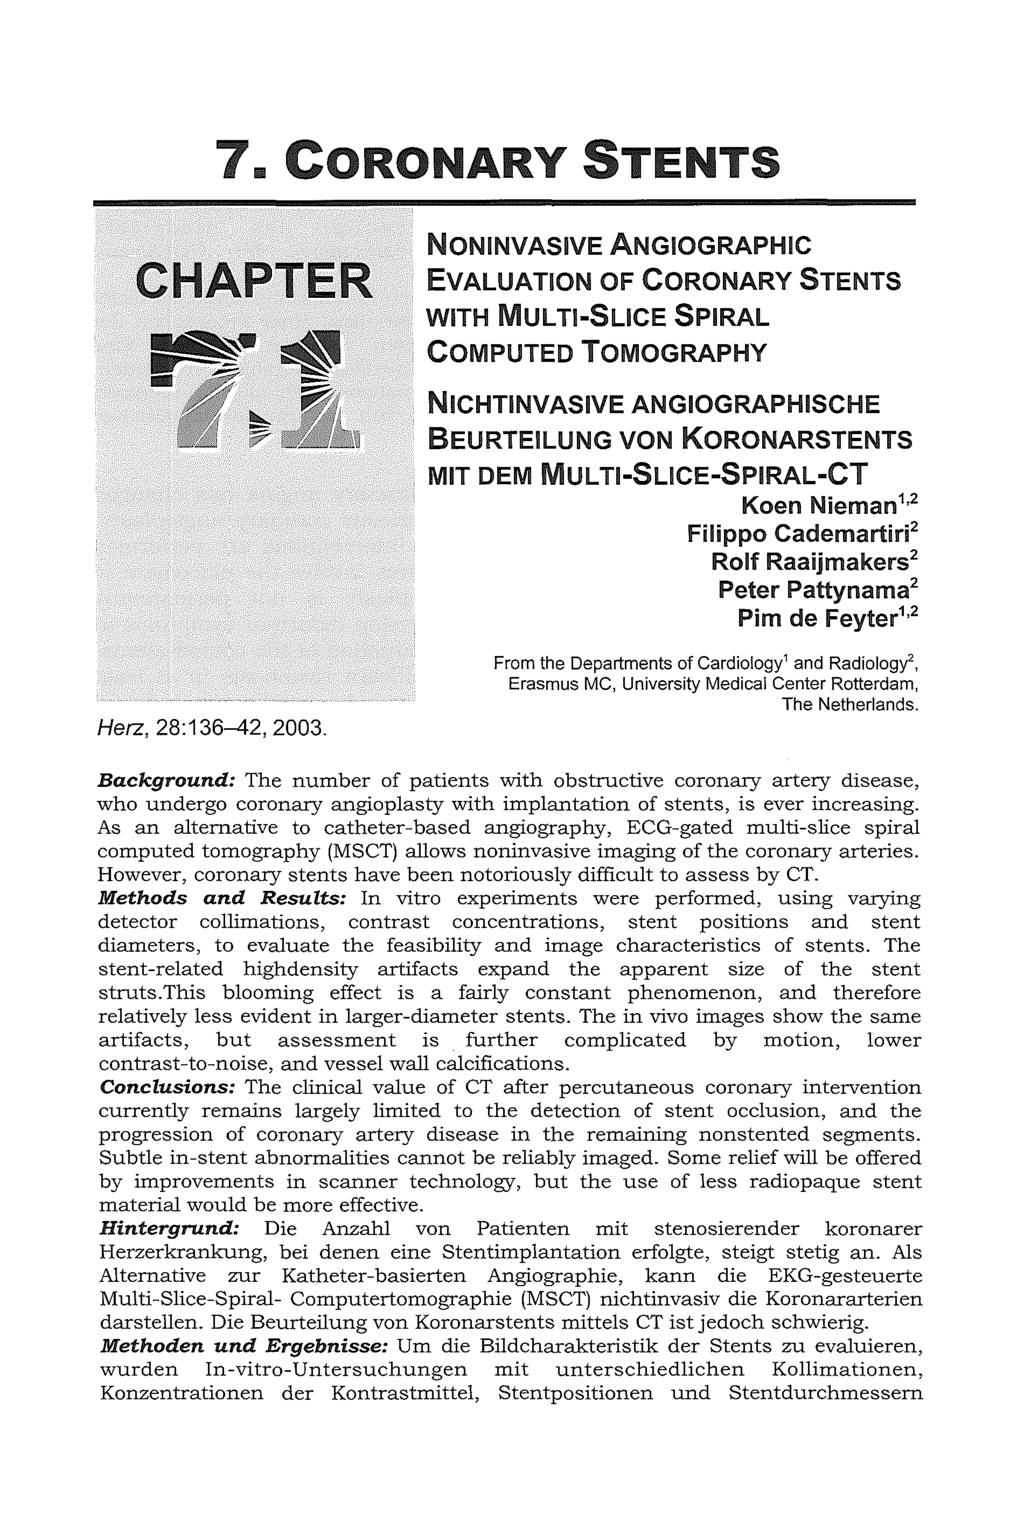 7. CORONARY STENTS CHAPTER NONINVASIVE ANGIOGRAPHIC EVALUATION OF CORONARY STENTS WITH MUL TI-SUCE SPIRAL COMPUTED TOMOGRAPHY NICHTINVASIVE ANGIOGRAPHISCHE BEURTEILUNG VON KORONARSTENTS MIT OEM MUL